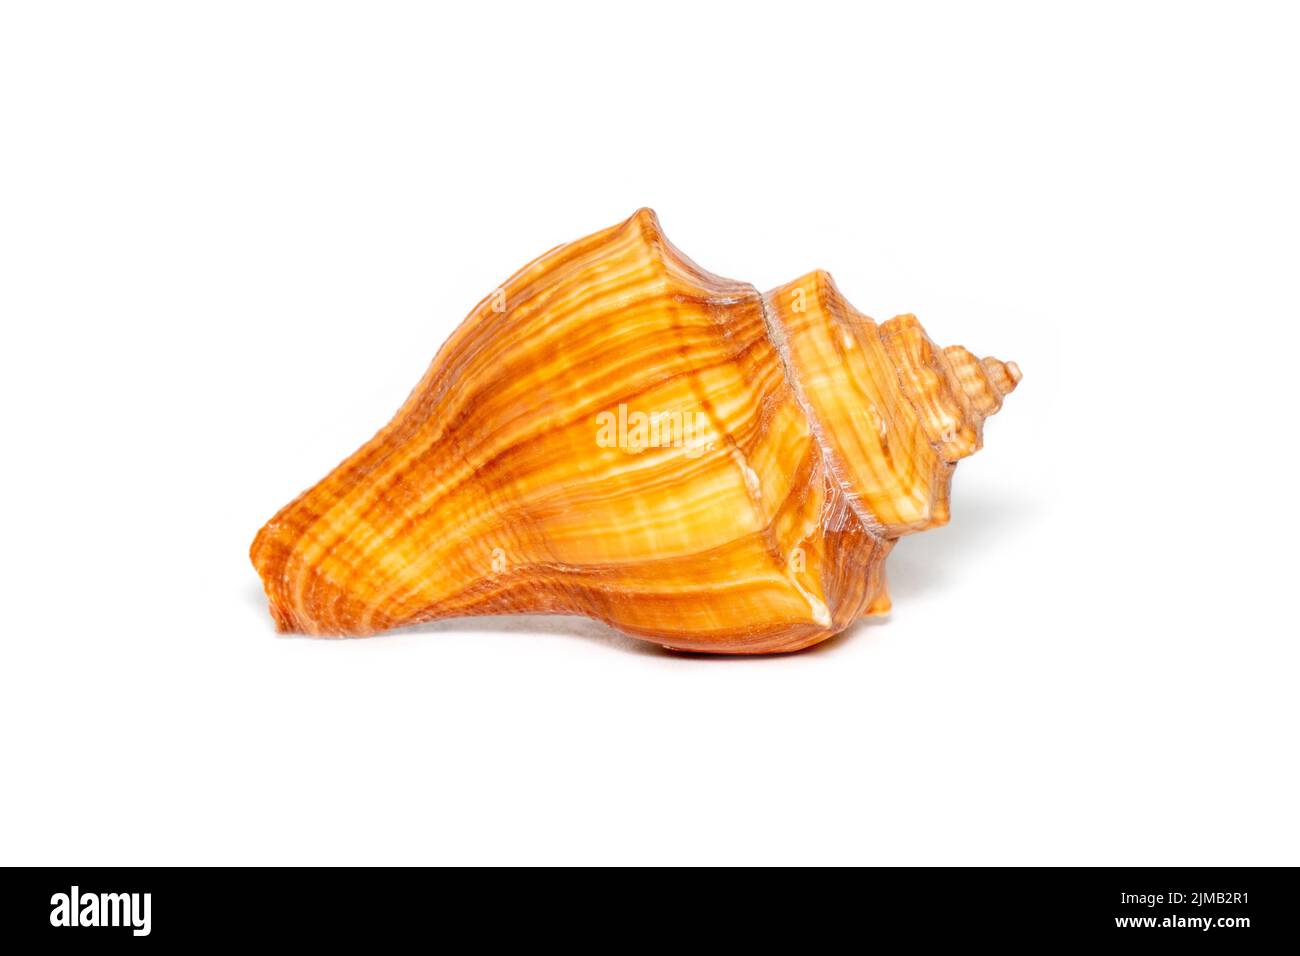 Image of brown conch sea shell on a white background. Undersea Animals. Sea shells. Stock Photo